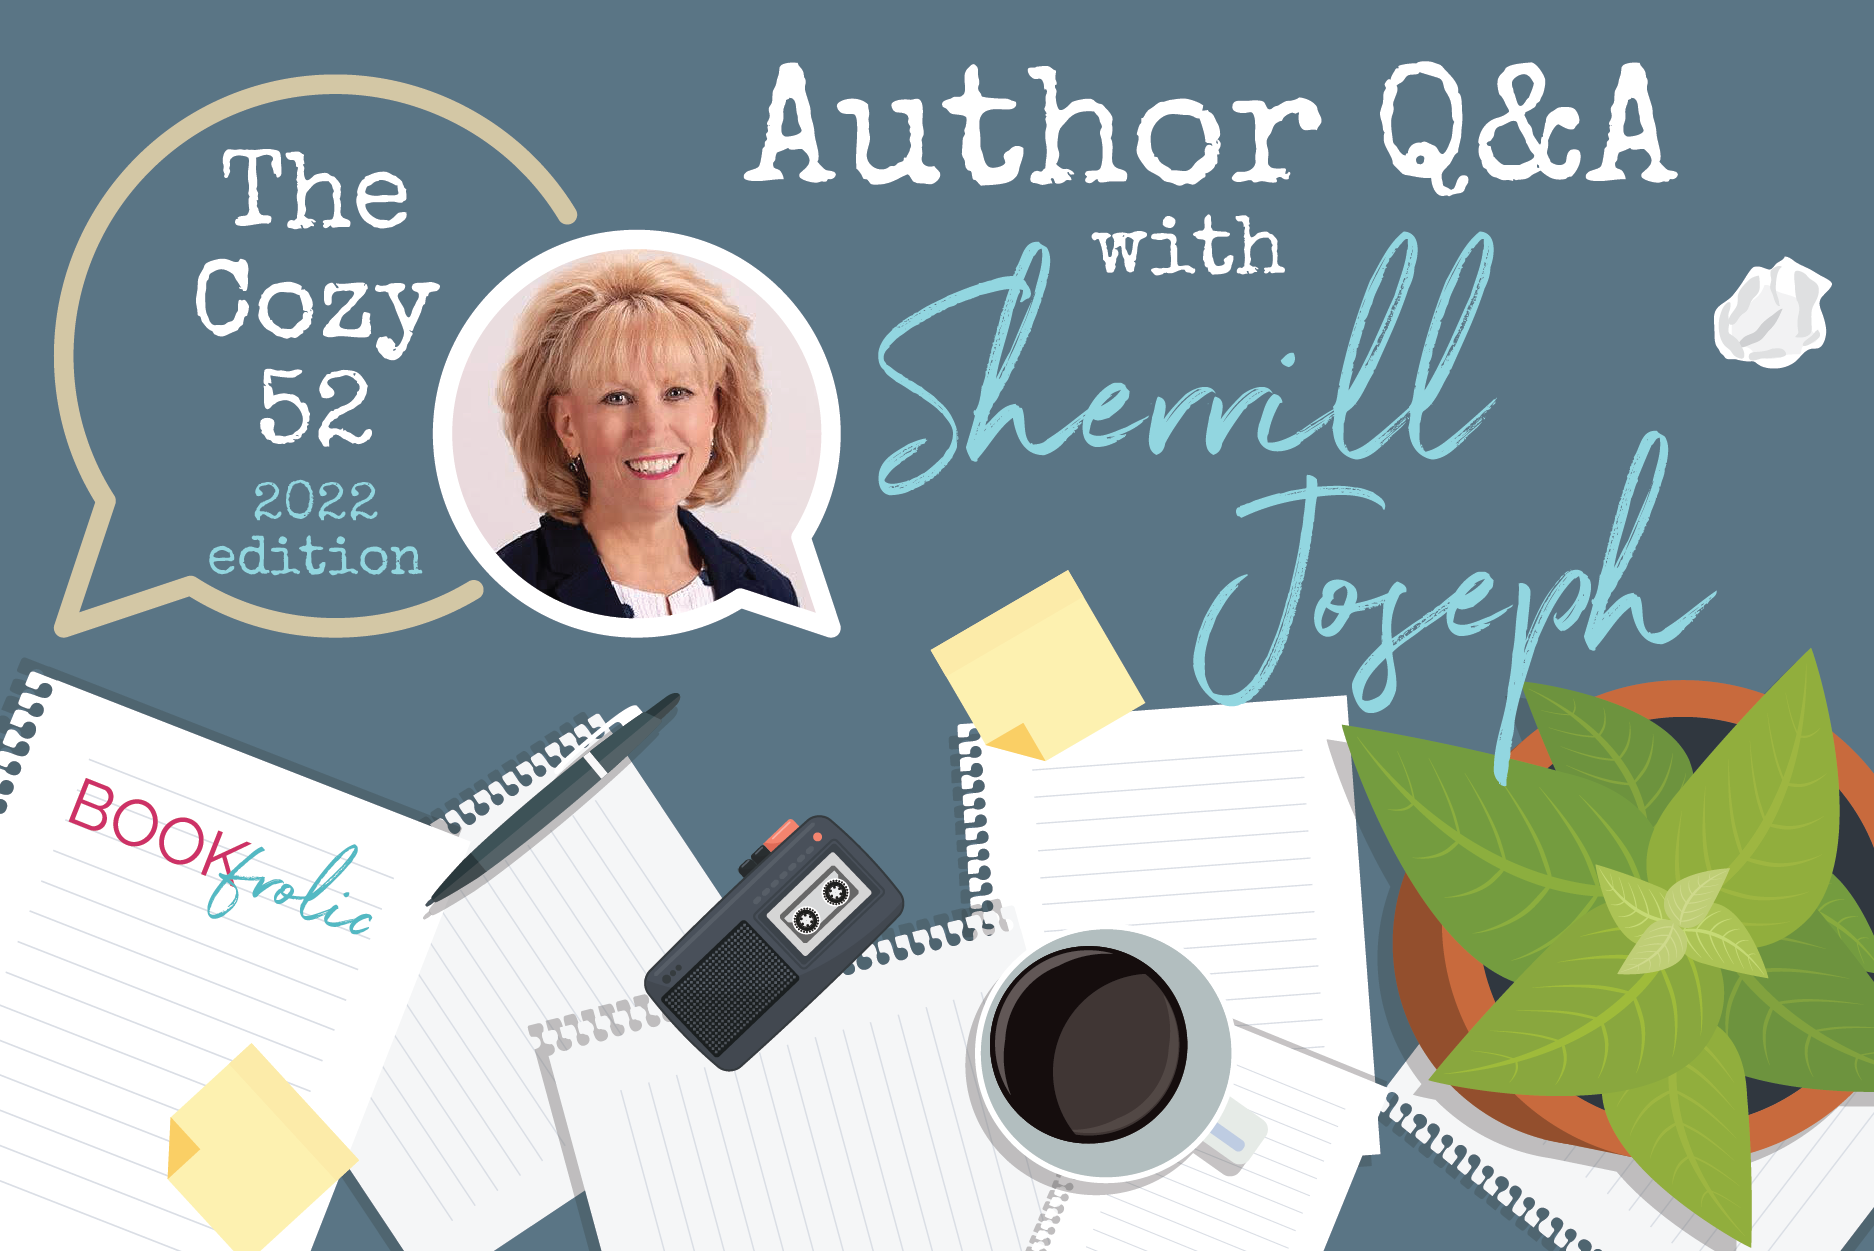 banner for author interview with Sherrill Joseph